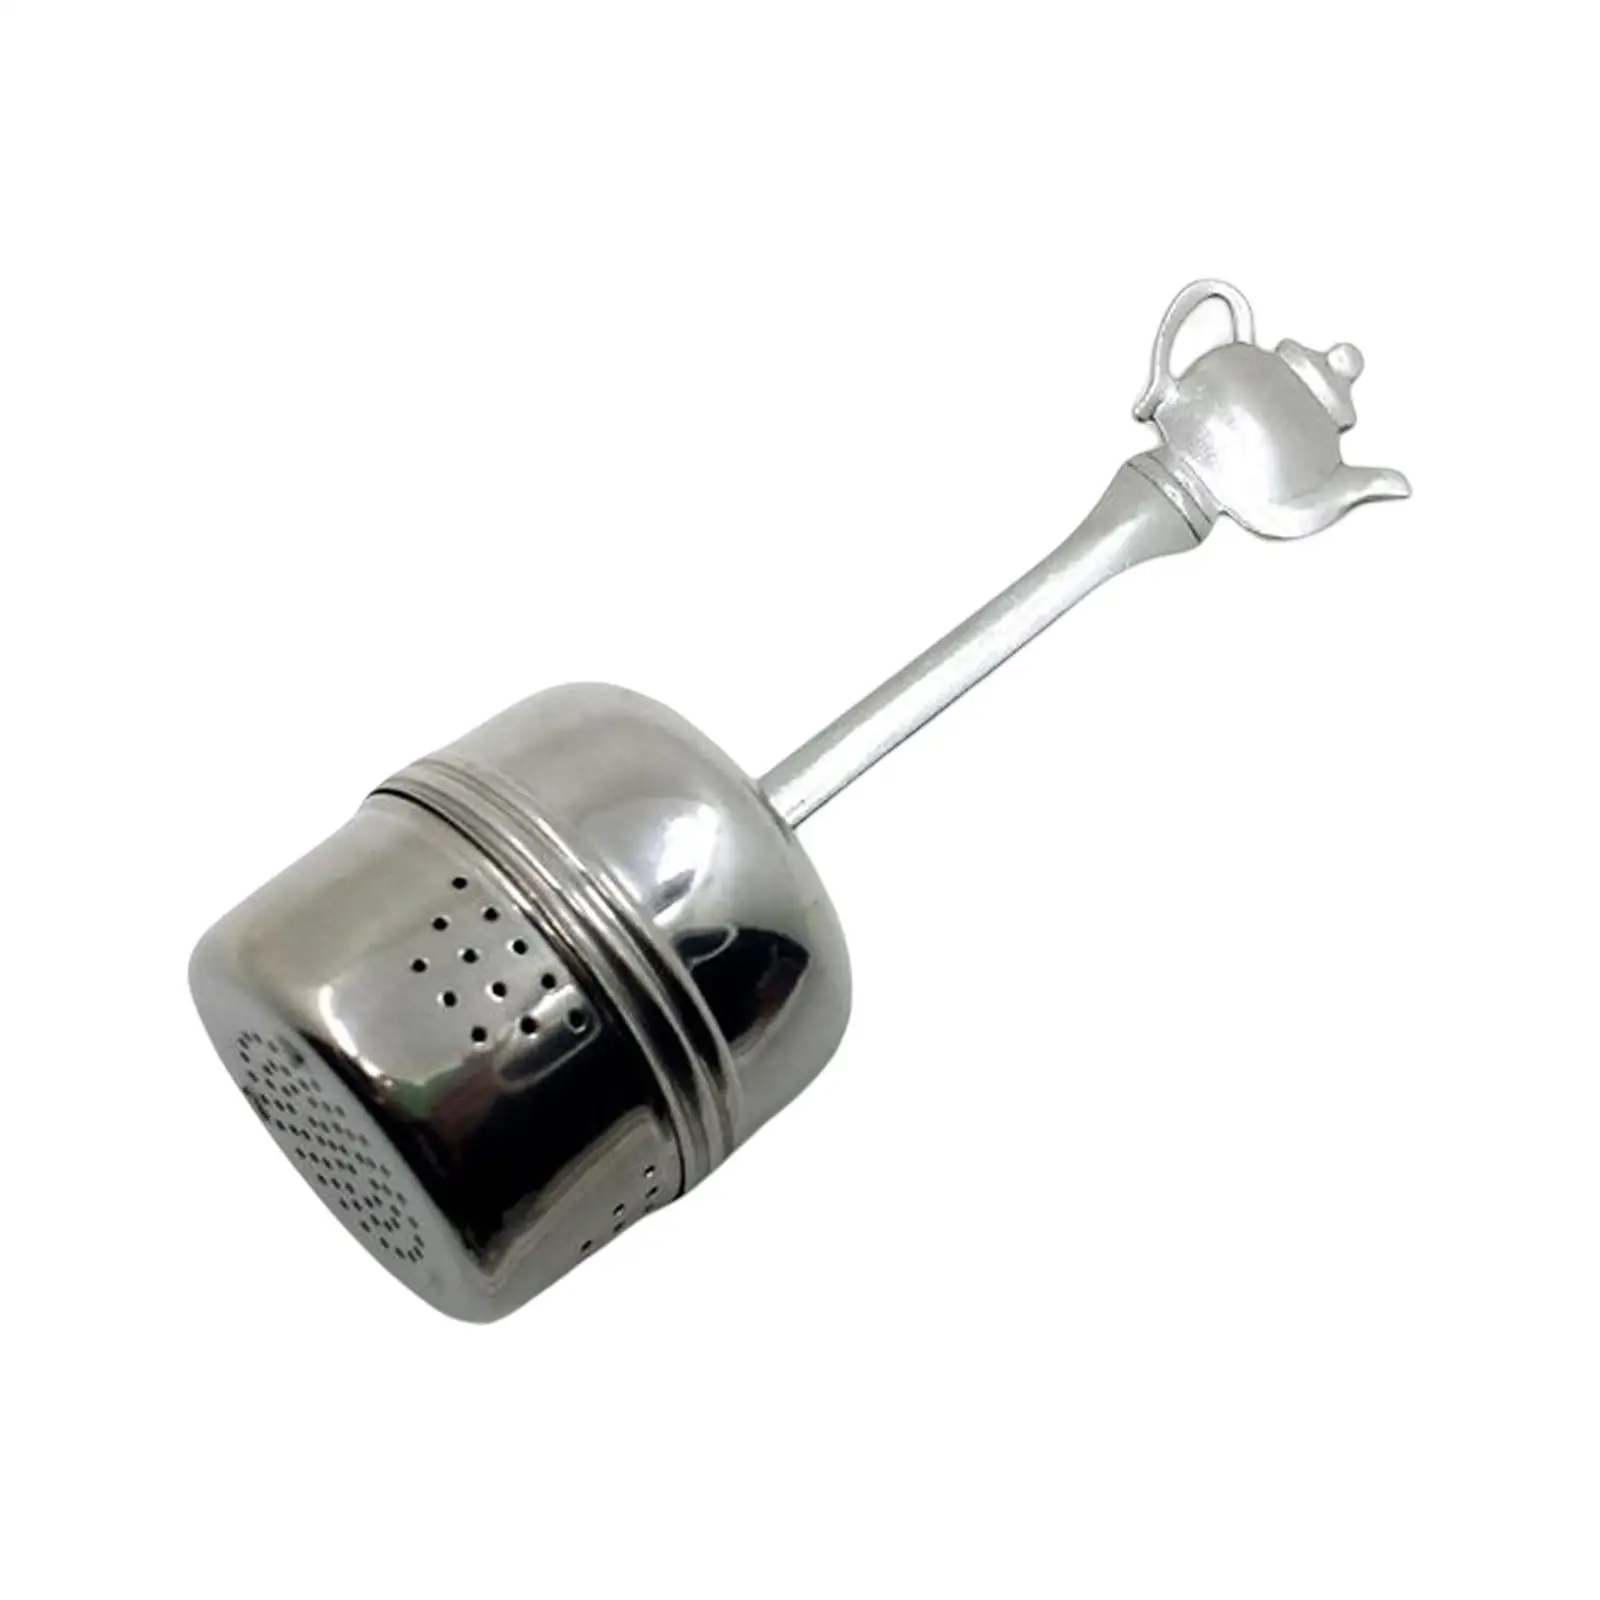 Tea Strainer with Handle 304 Stainless Steel Portable Tea Ball Infuser for Loose Tea Cup and Teapot Spices Seasonings Cafe Home